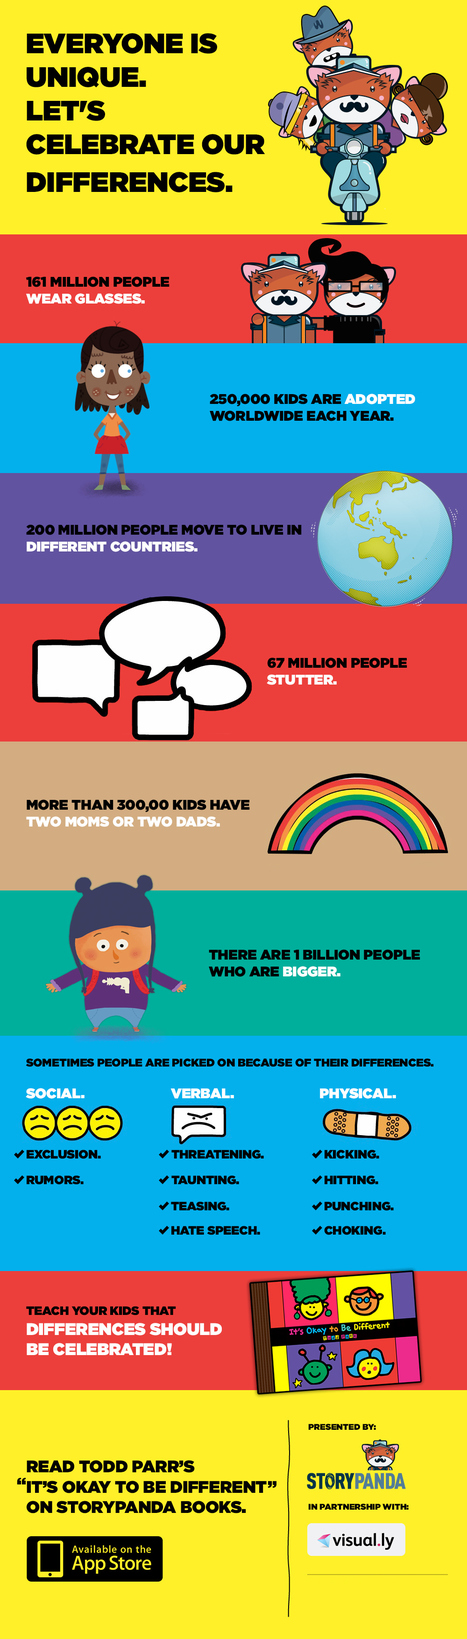 A Must-See Anti-Bullying Poster Perfect For Classrooms | eflclassroom | Scoop.it